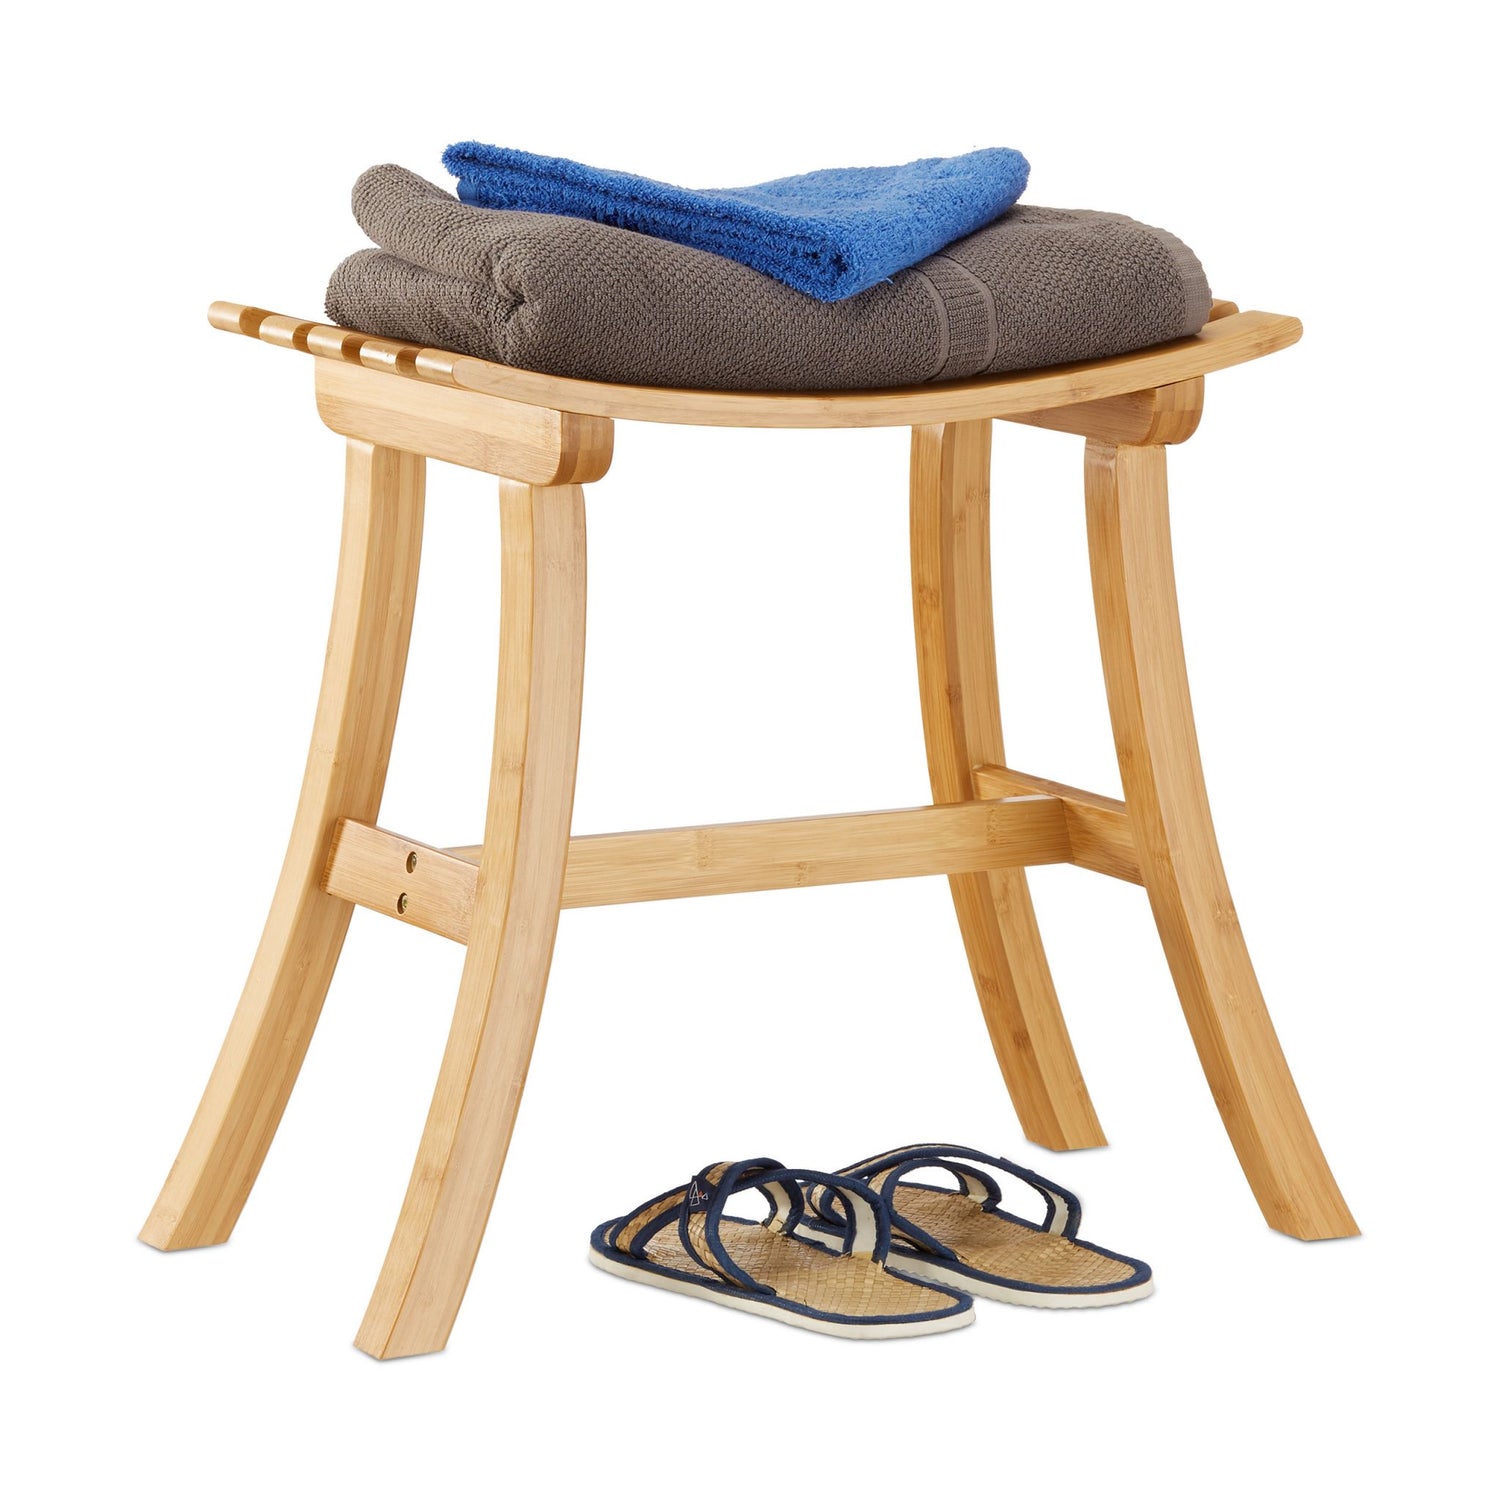 RelaxDays Curved Bamboo Footstool Bamboo Bathrooms